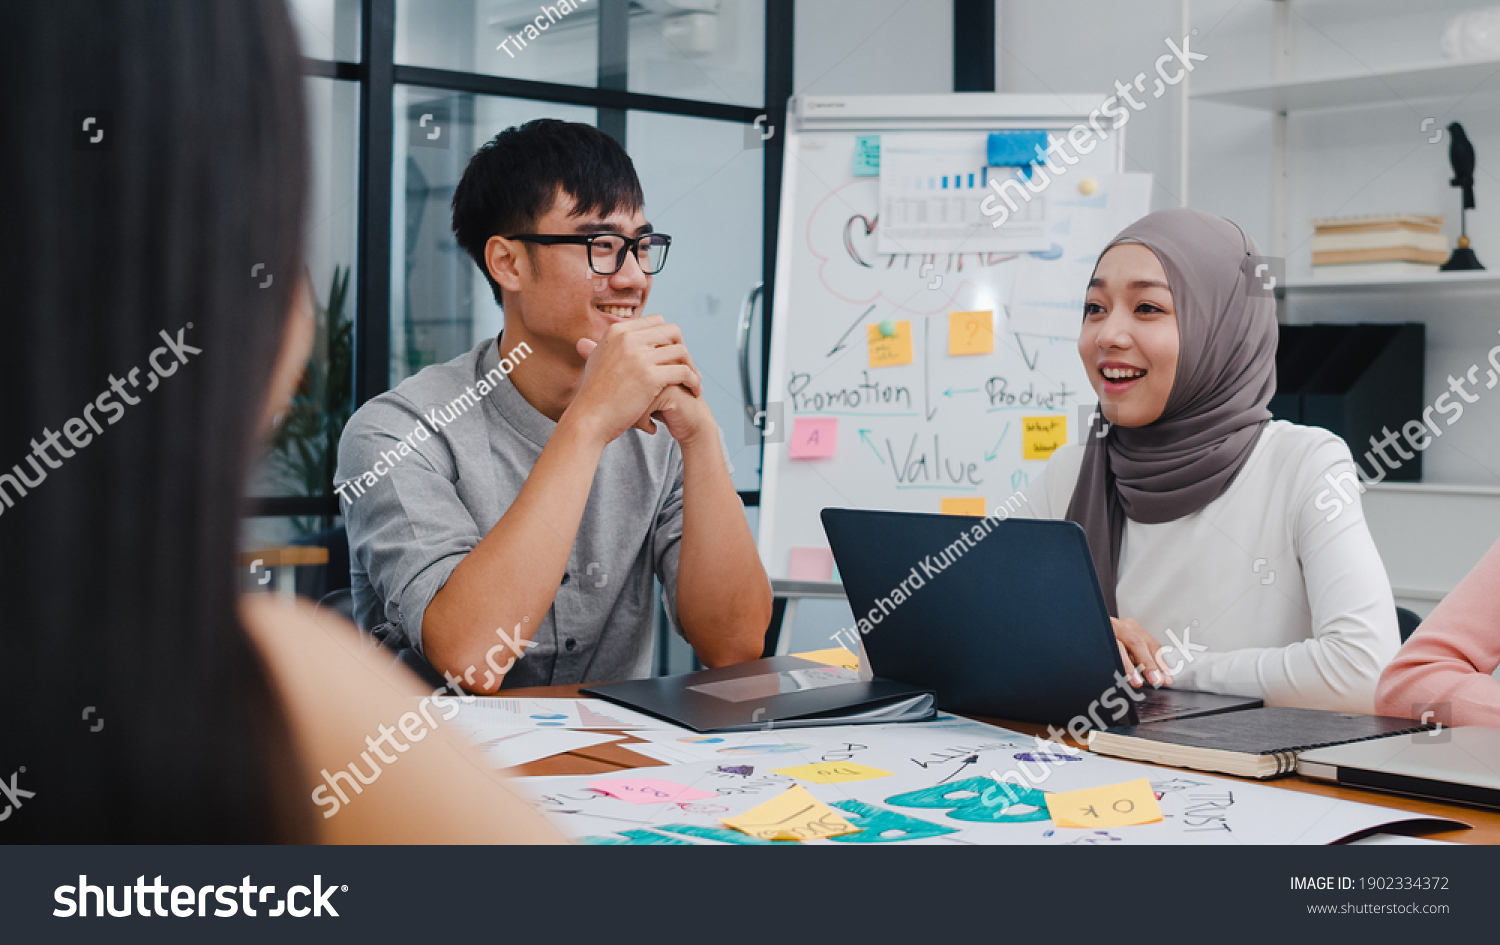 Multiracial group of young creative people in smart casual wear discussing business brainstorming meeting ideas mobile application software design project in modern office. Coworker teamwork concept. #1902334372